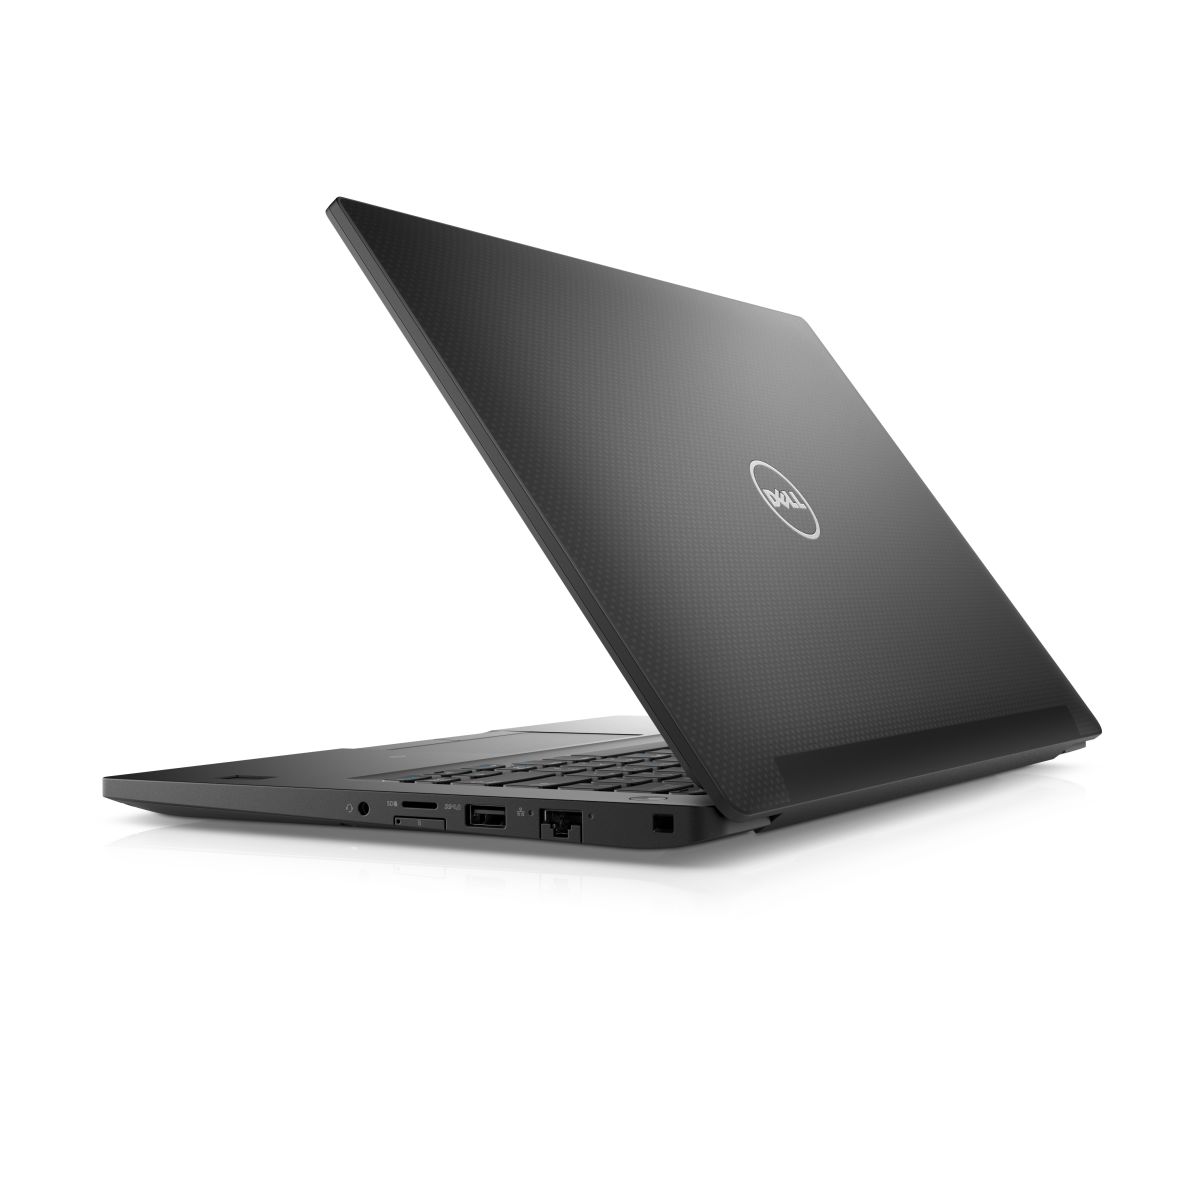 DELL Latitude 7480 - P3D96 laptop specifications